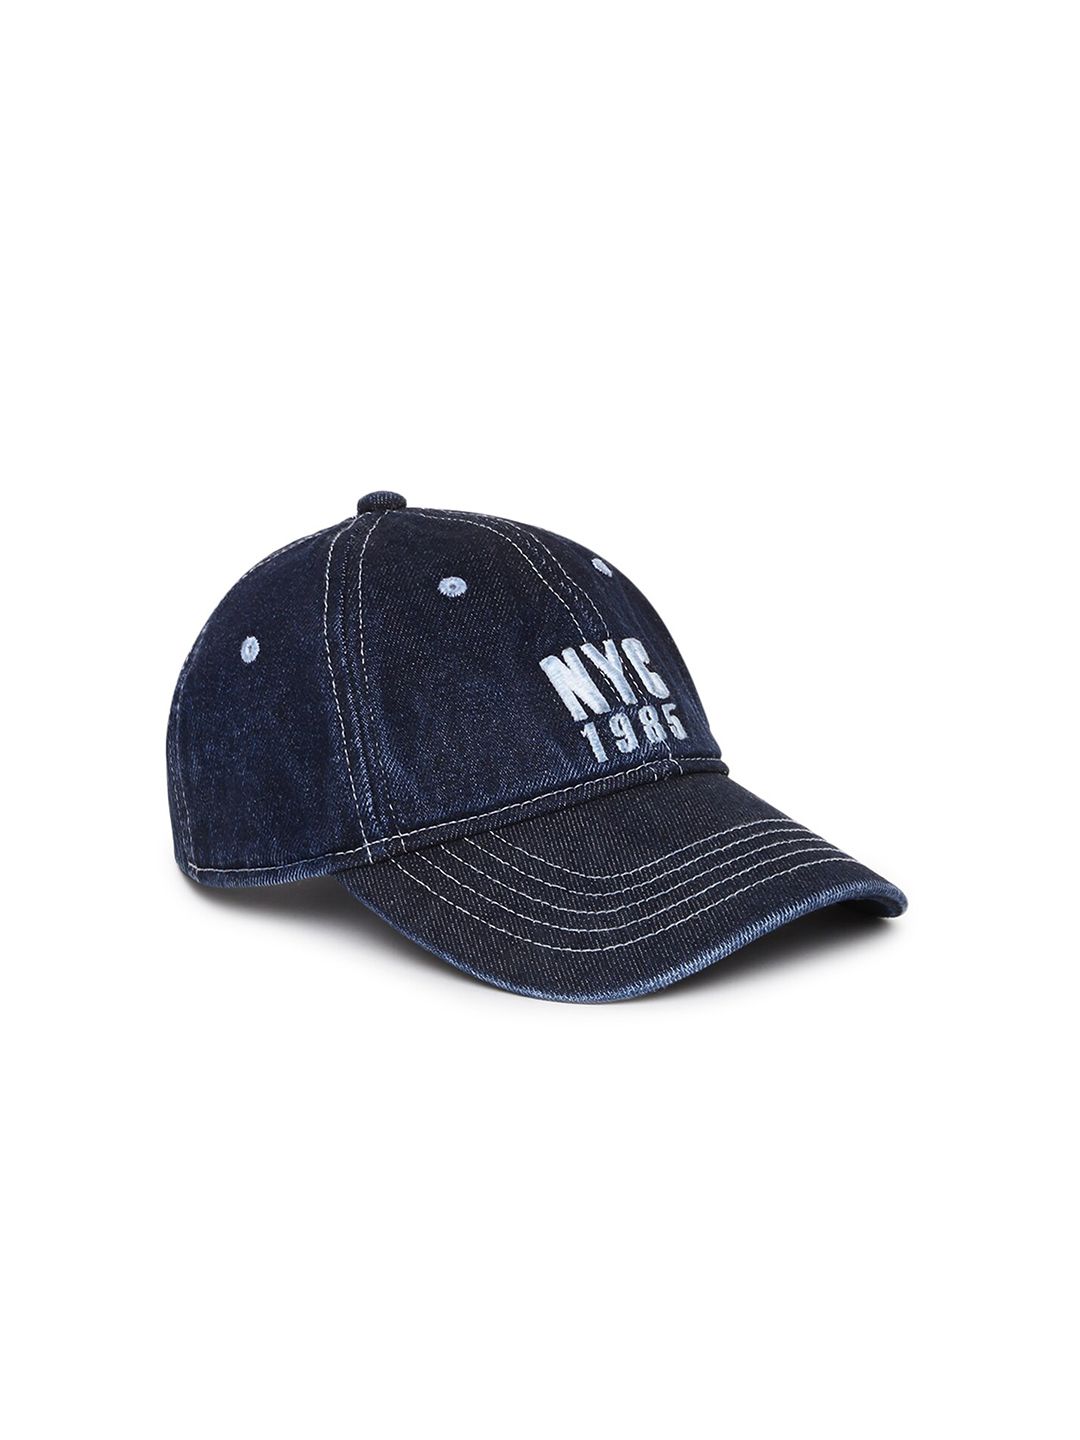 MR BUTTON Unisex Navy Blue & White Embroidered Visor Cap Price in India